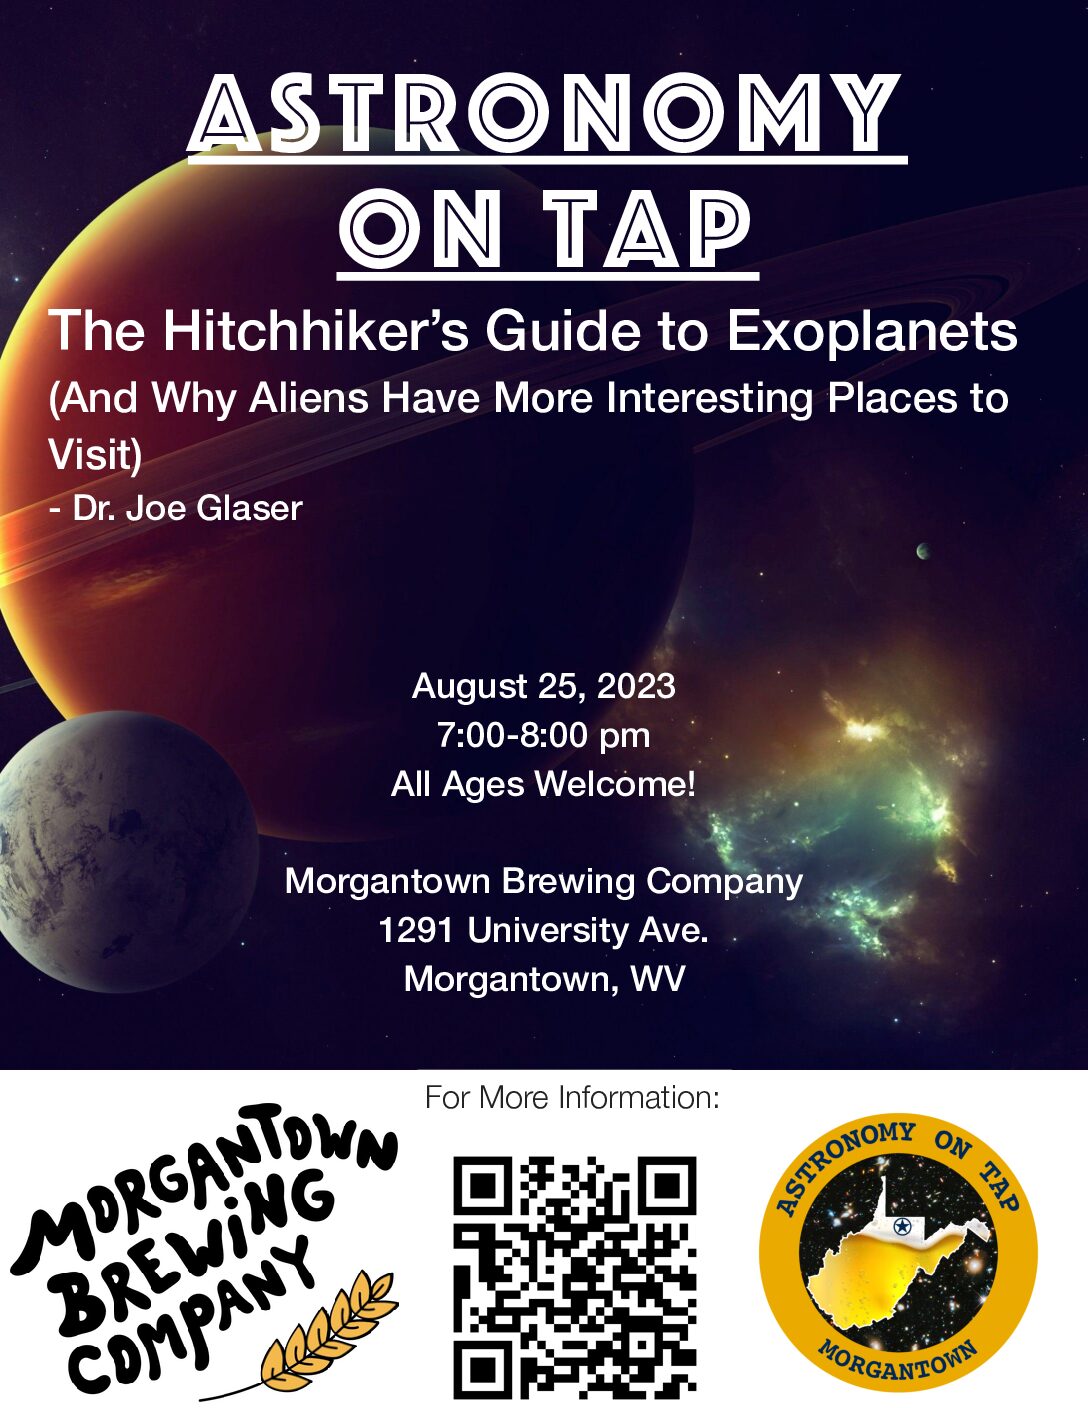 AoT Morgantown - The Hitchhikers Guide to Exoplanets - Astronomy On Tap